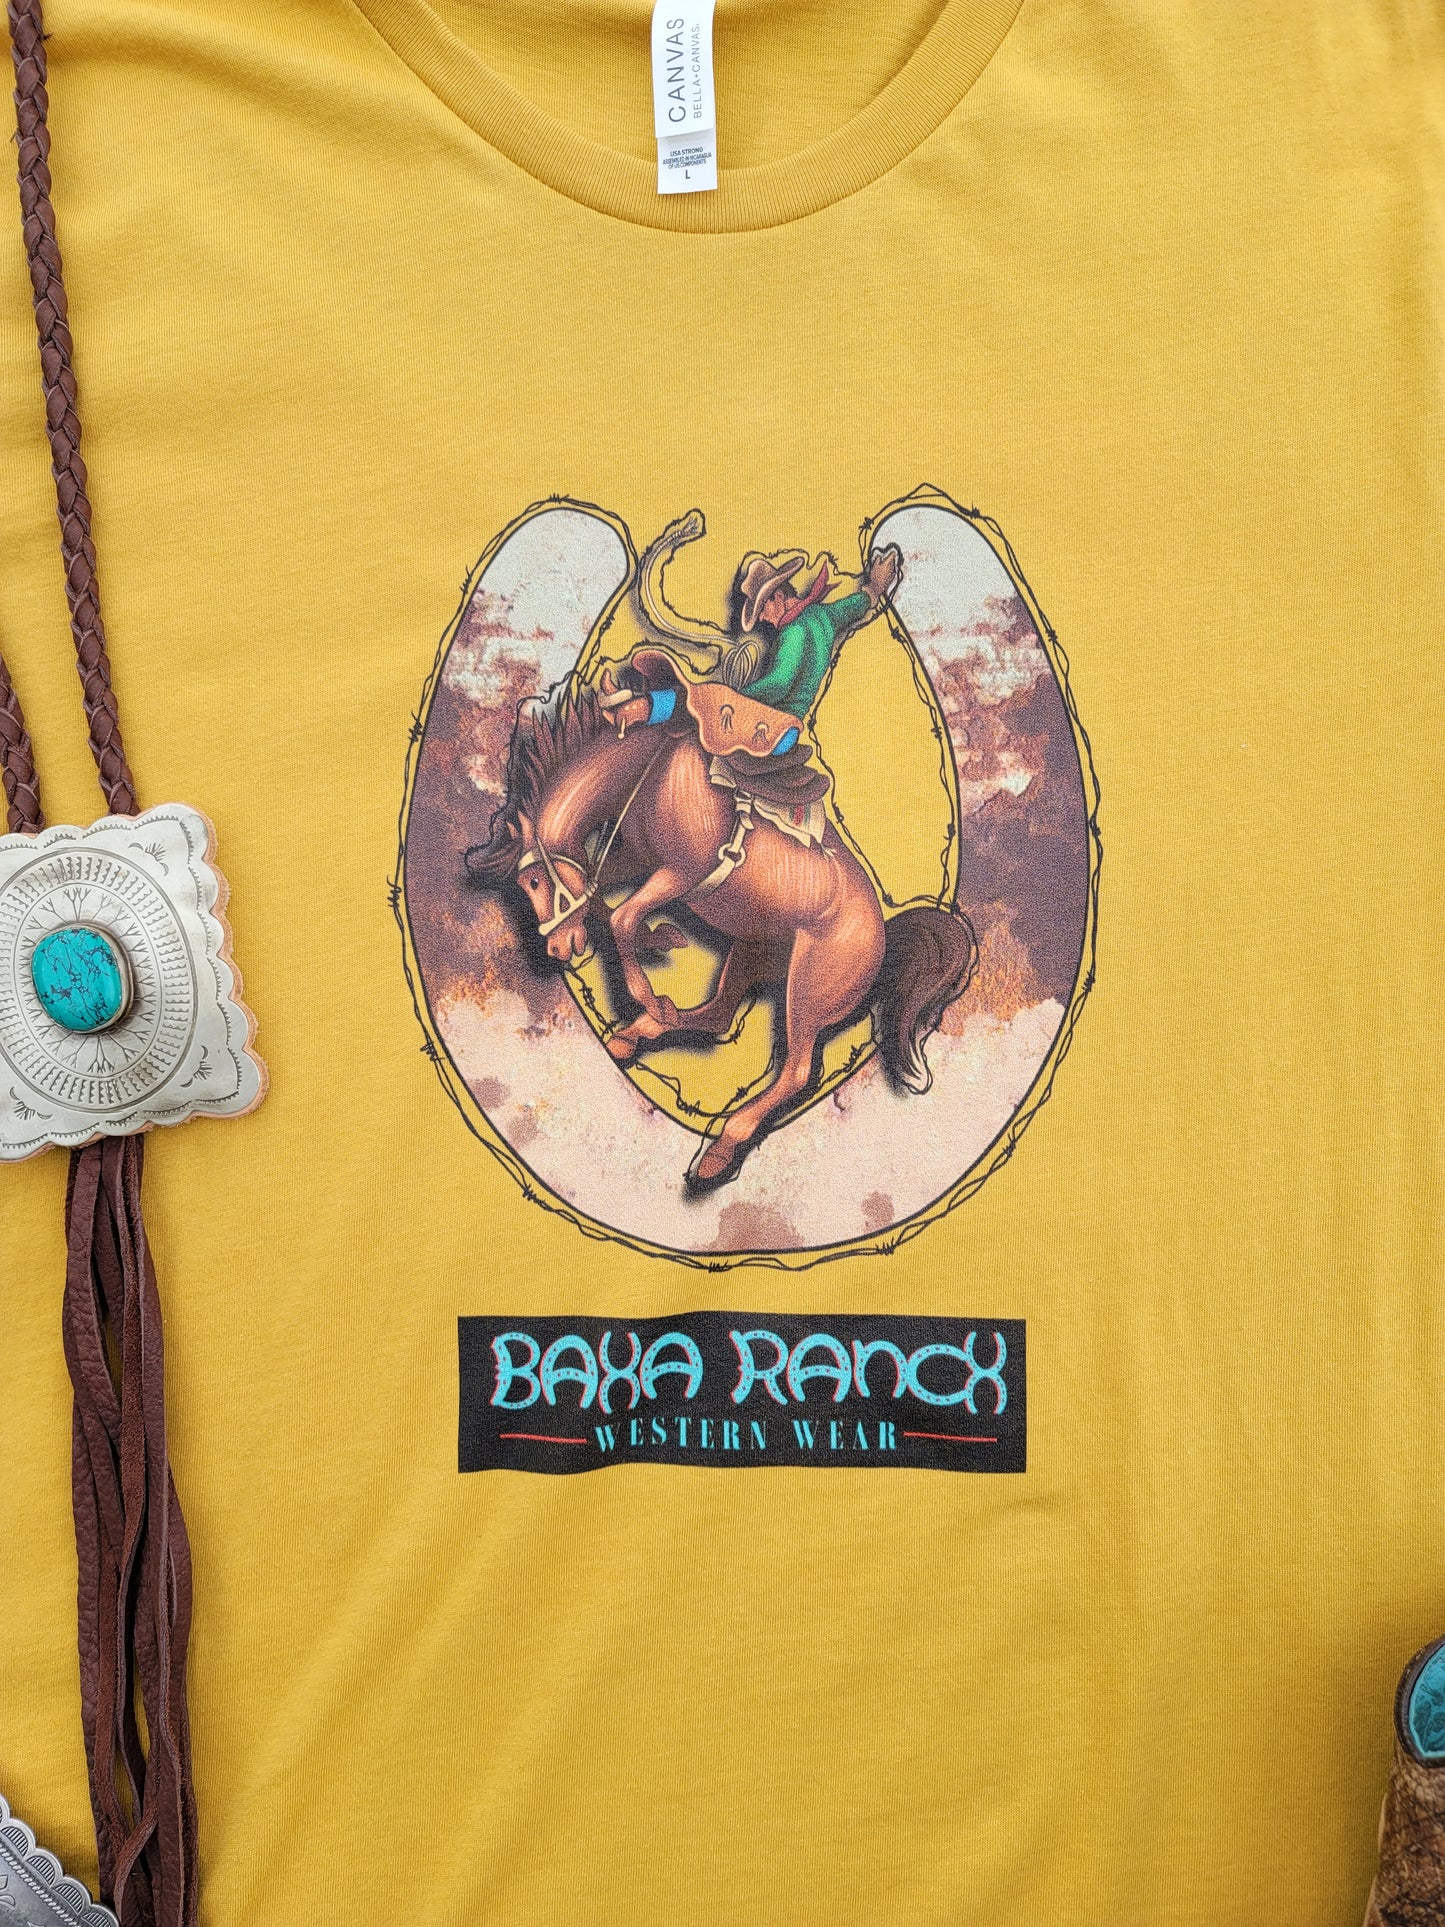 Baha Ranch Bronc Tee - baha ranch, baha ranch logo, bronc, bronc rideer, bronco, broncos, broncriding, brookshire, brown & white, brown color, cow print, cowboy, graphic t, graphic tee, horse shoe, horseshoe, horseshoes, mustard, mustard bull head, mustard color, mustard duster, mustard earring, mustard lace, mustard leather, mustard naja, mustard tank, mustard tee, tee, tshirt, unisex, unisex tee -  - Baha Ranch Western Wear